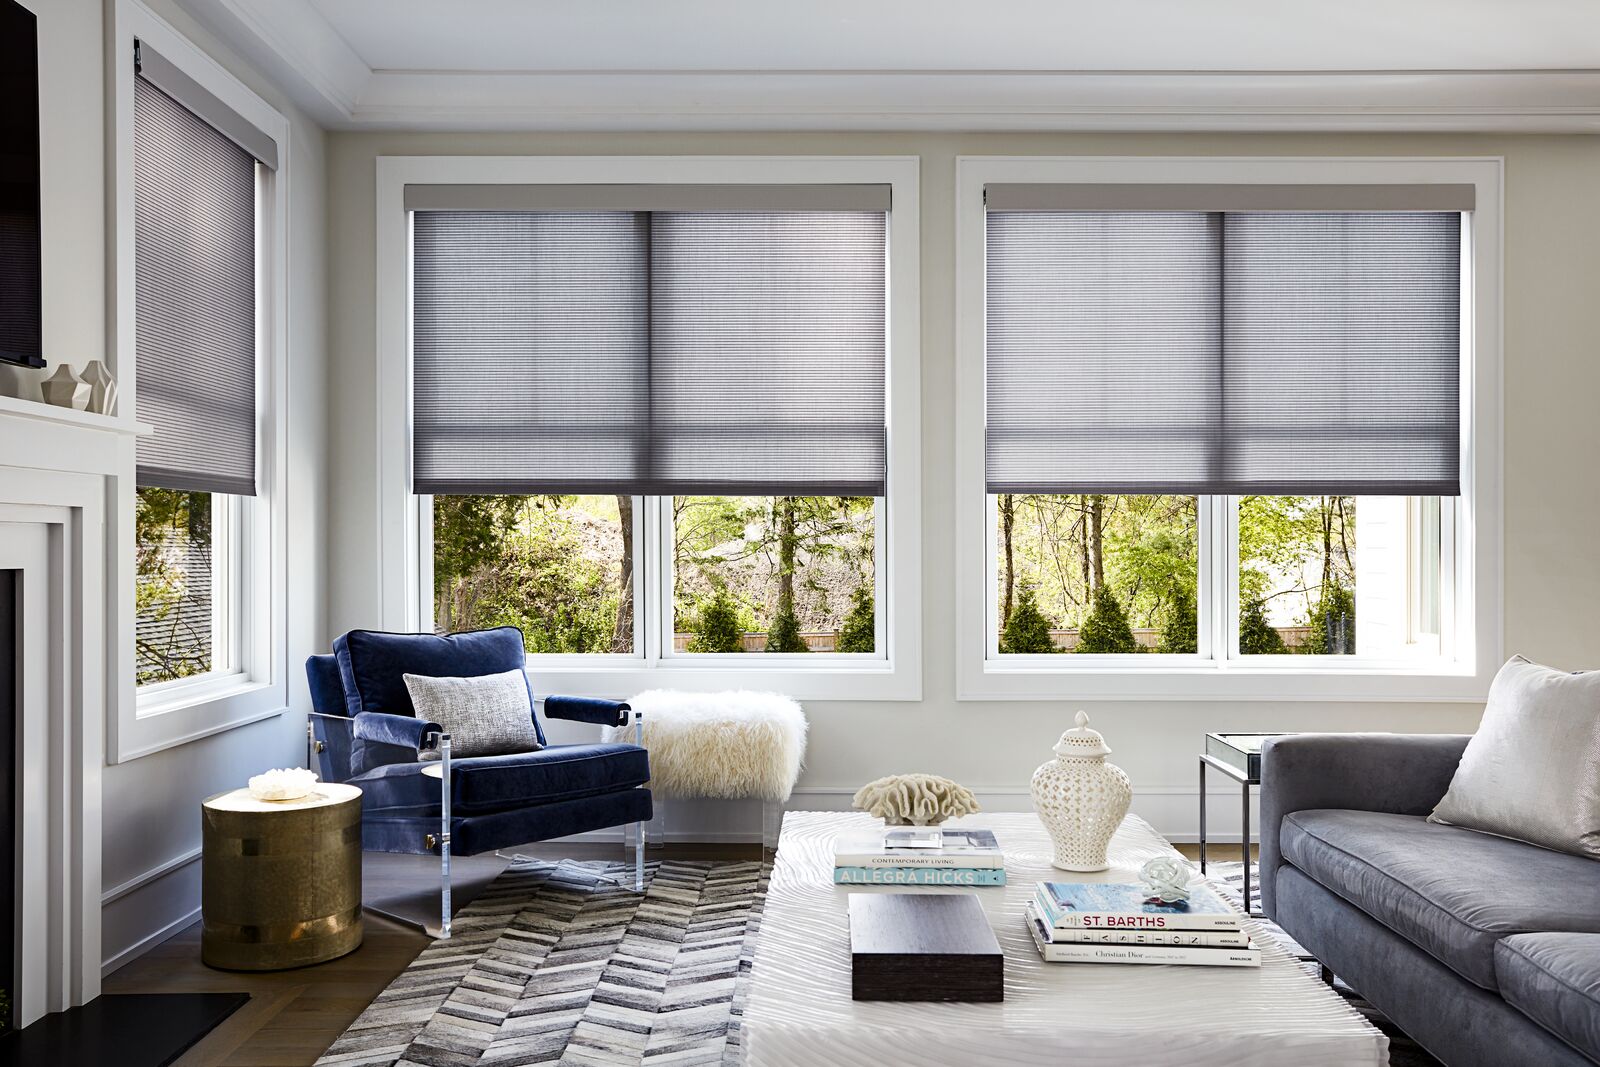 Roller shades cover two large windows in a modern living room